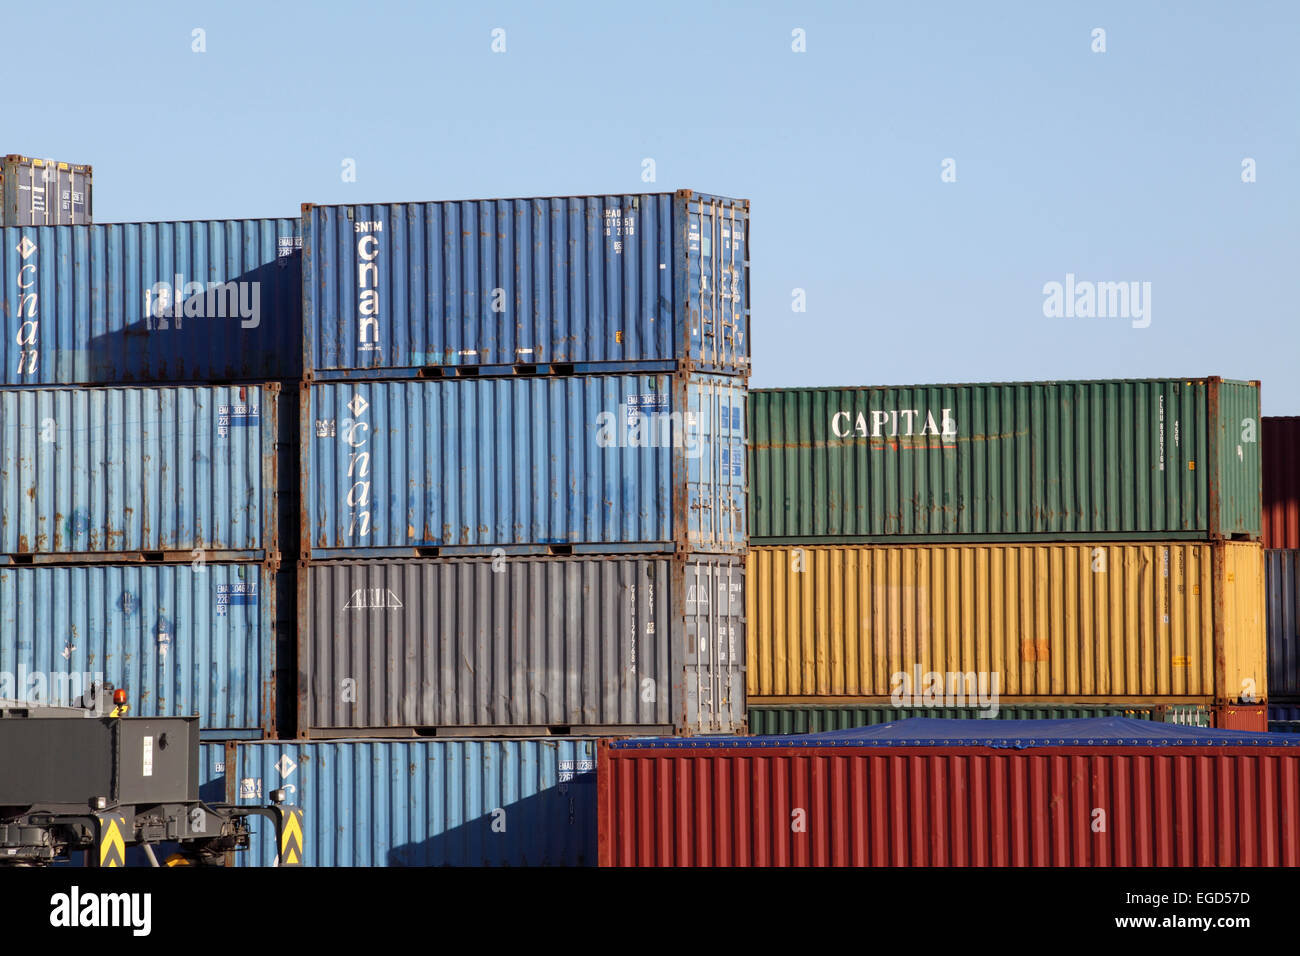 Contrasting and colorful stacks of shipping containers piled-up at Barcelona docks. Stock Photo